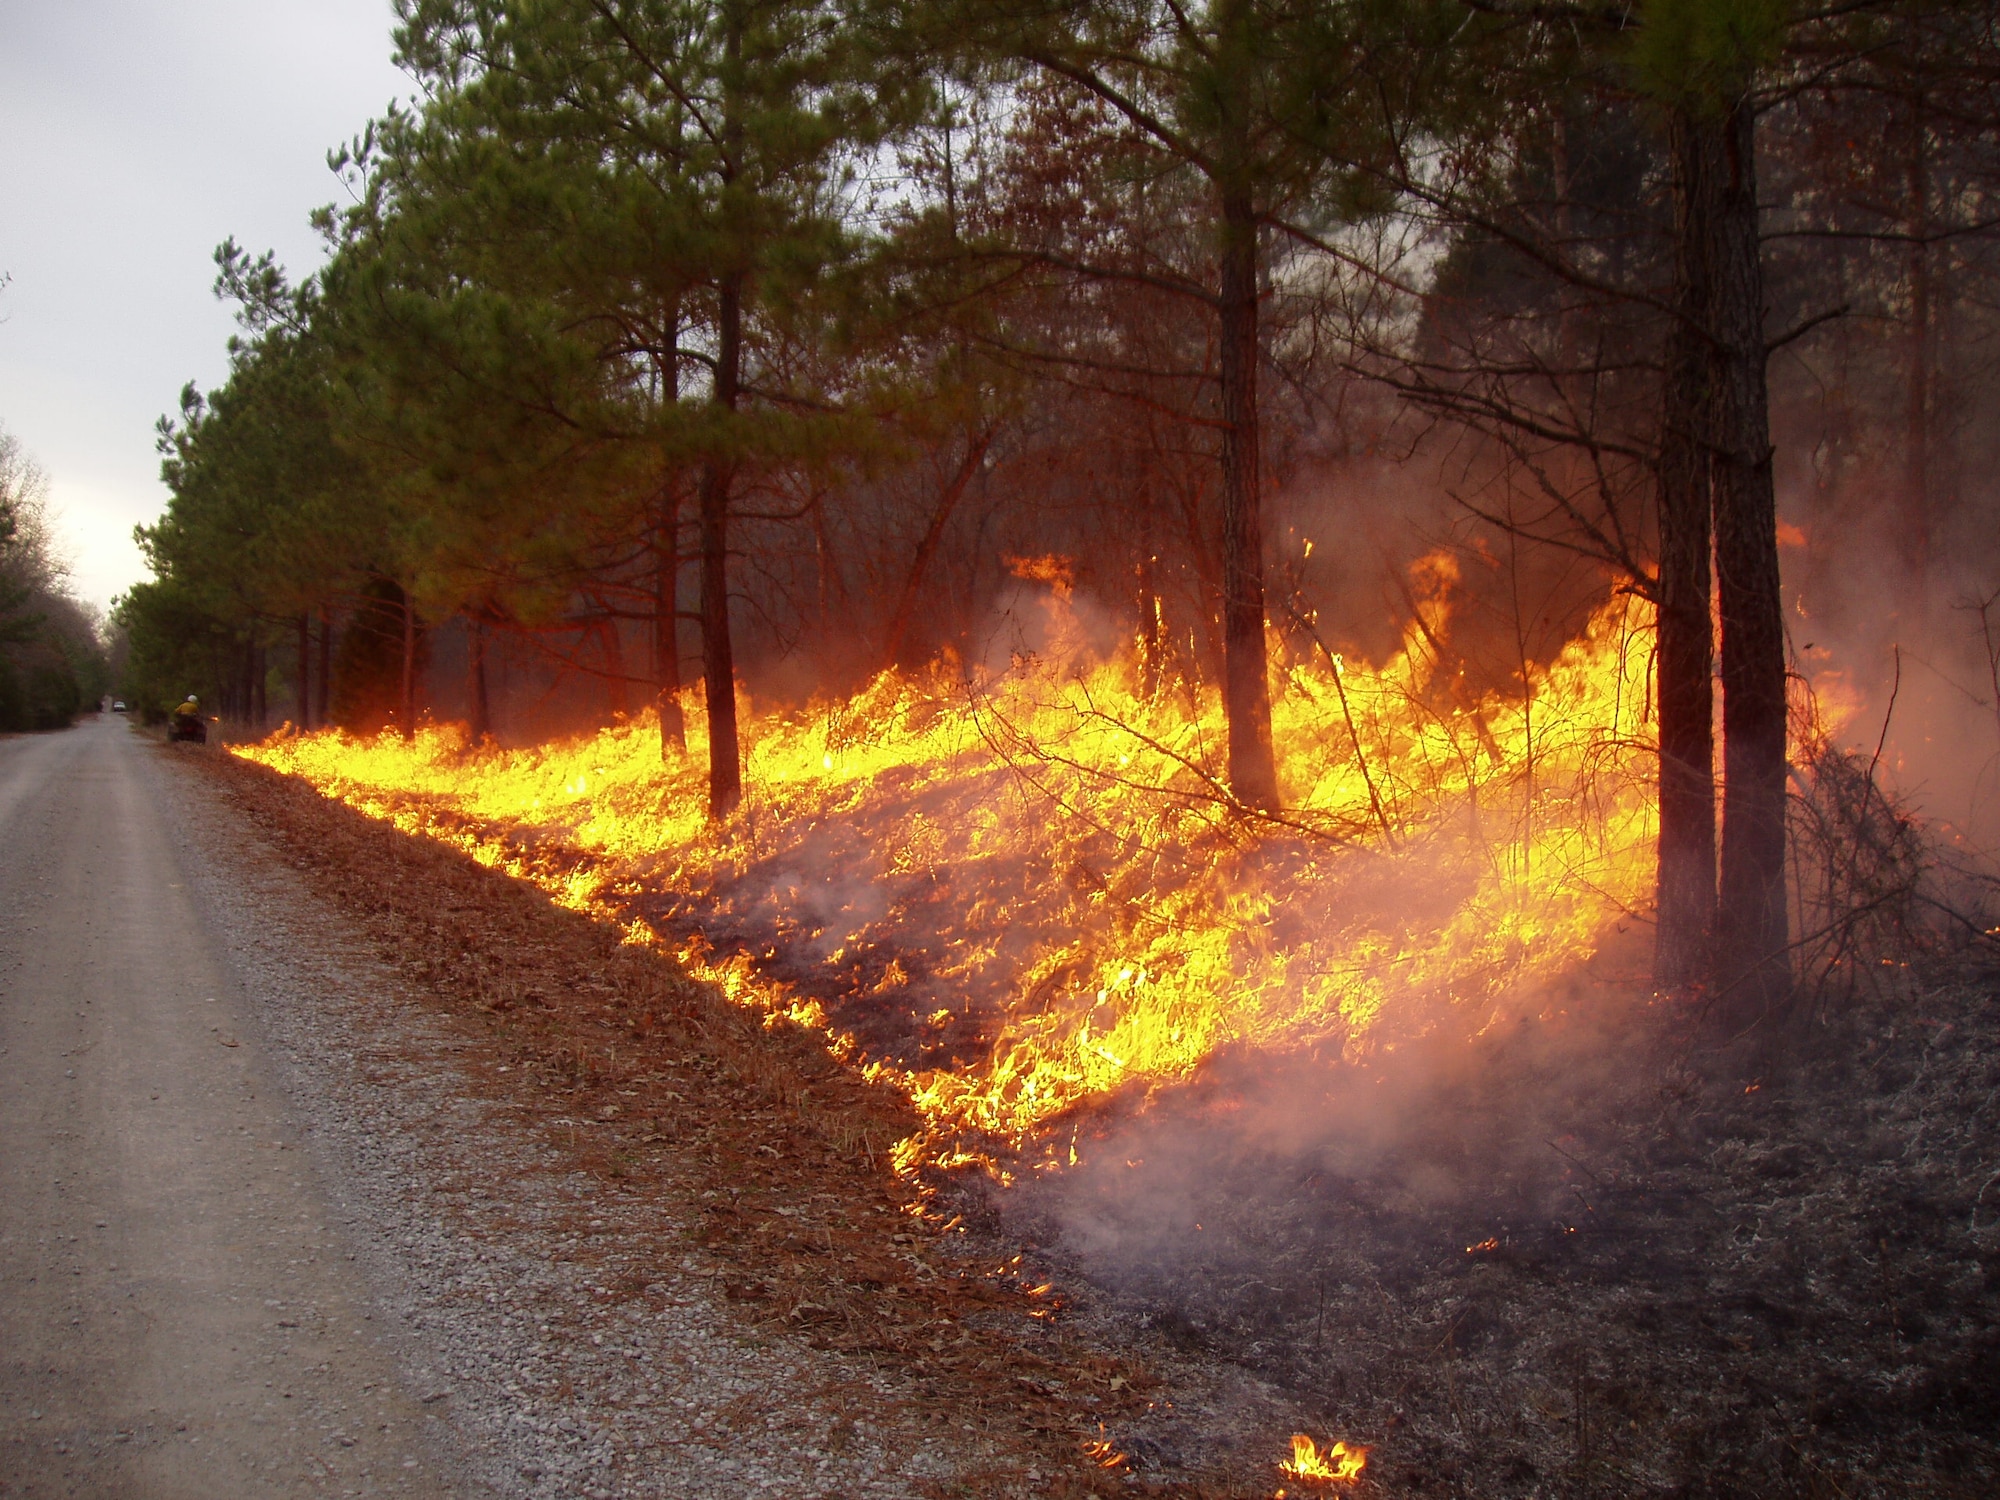 This prescribed fire shown at Arnold Air Force Base, Tenn., is a necessary process that promotes new growth by removing dead vegetation and suppressing wood species that would eventually grow into a forest in the absence of fire. (U.S. Air Force photo)